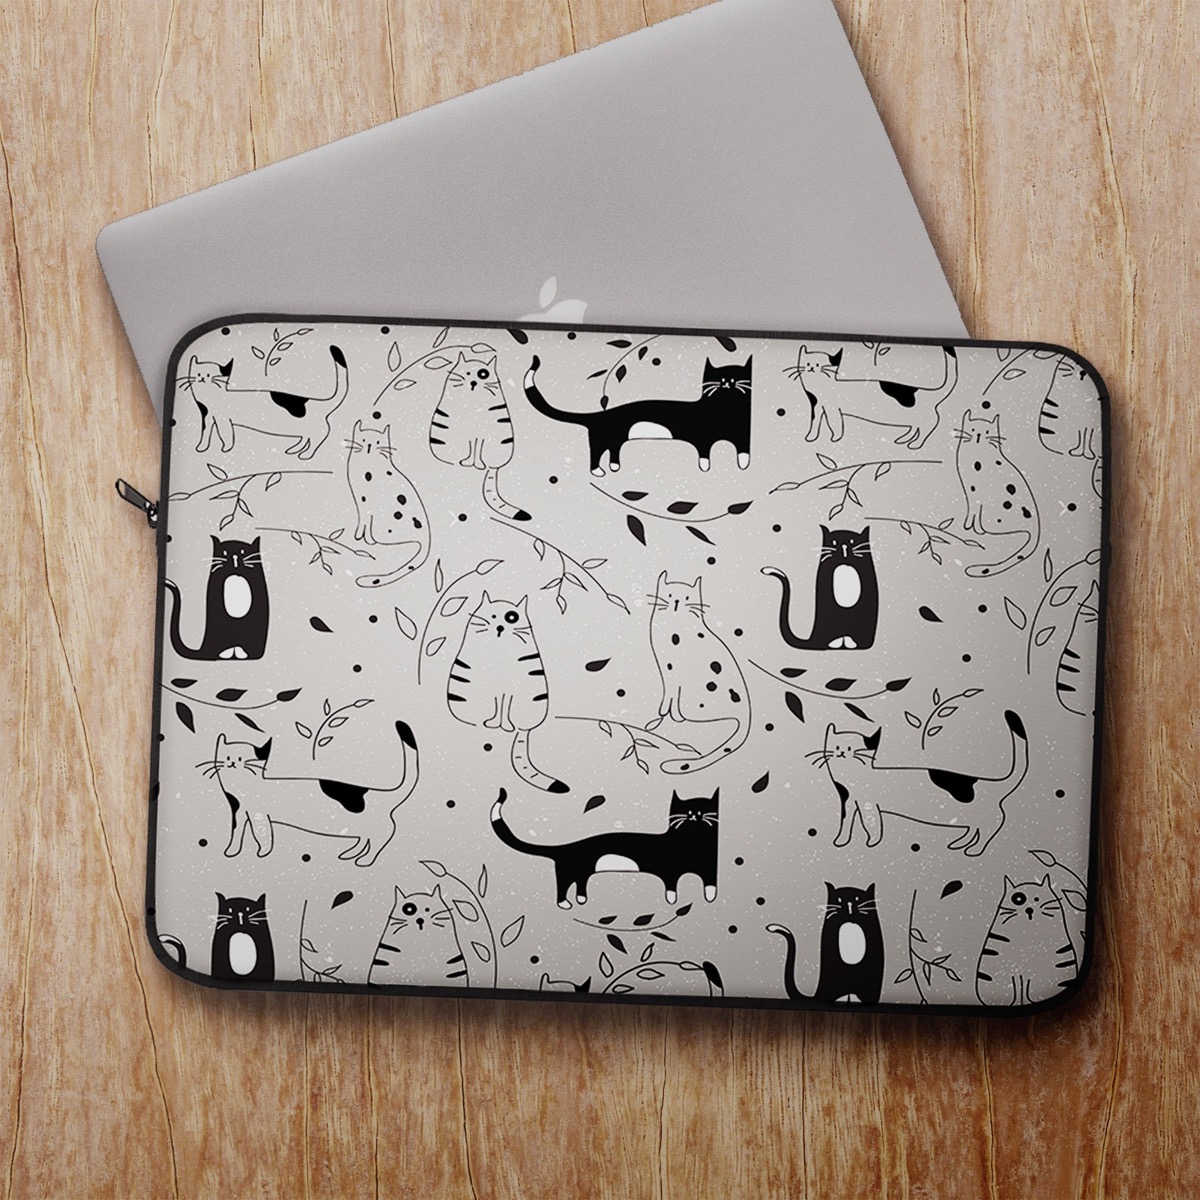 white laptop sleeve with black cats on it, cat gifts